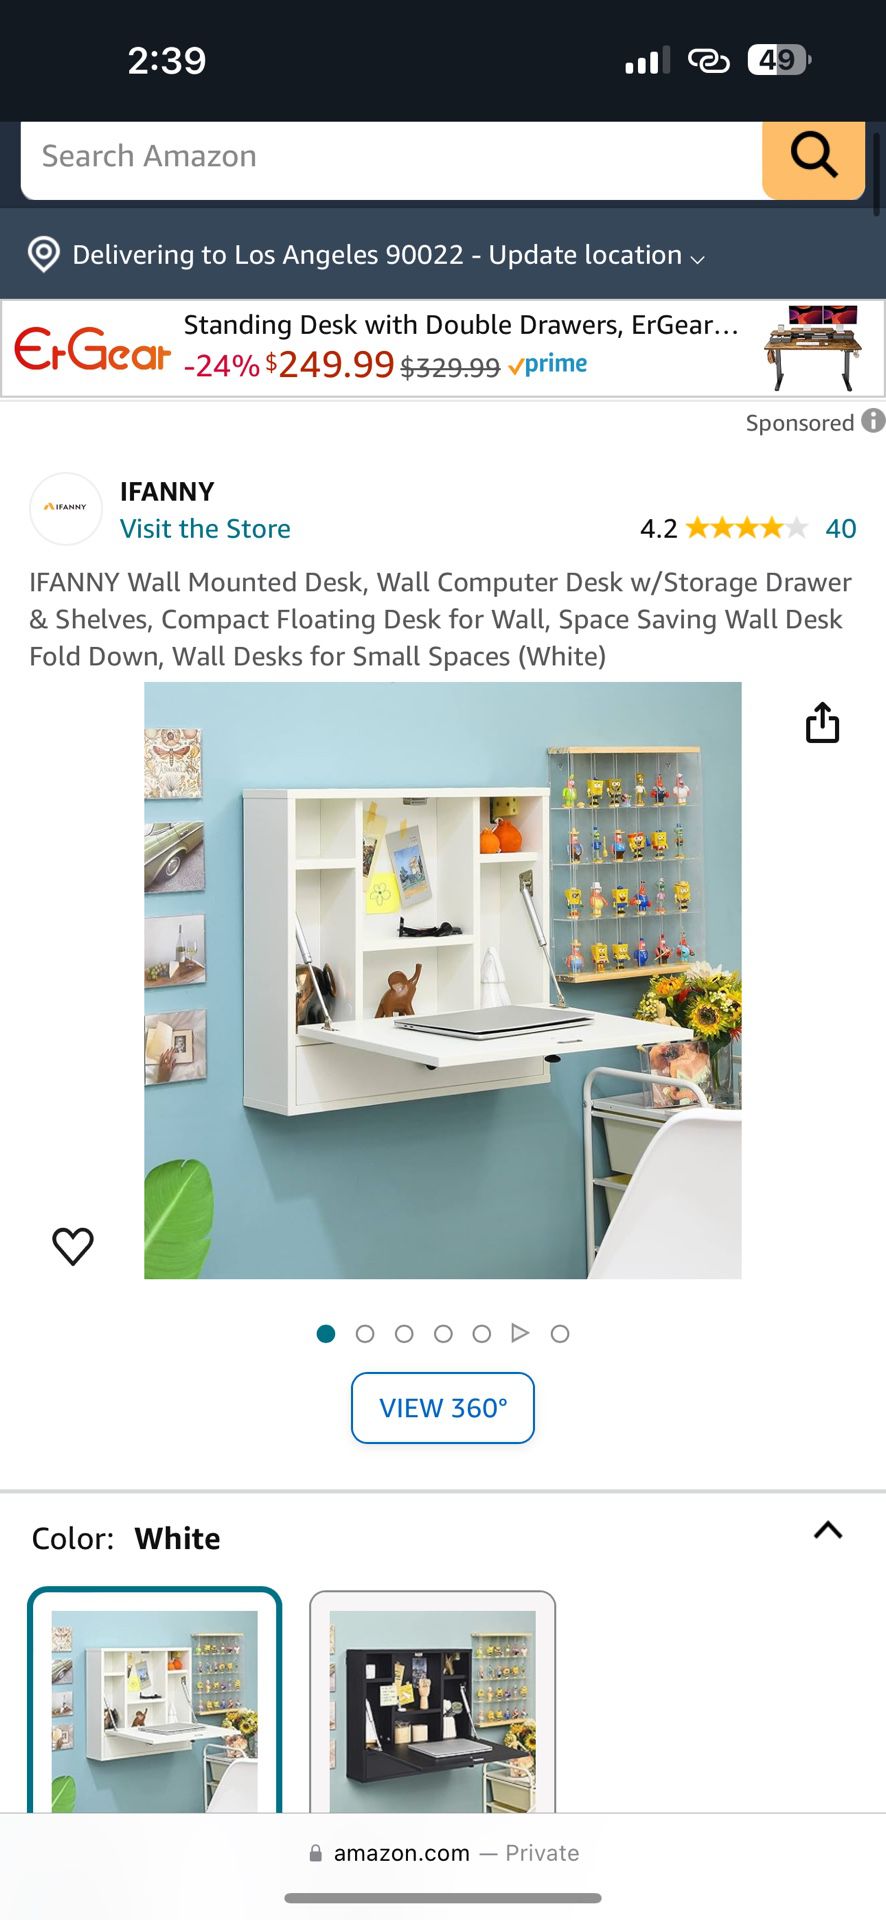 IFANNY Wall Mounted Desk, Wall Computer Desk w/Storage Drawer & Shelves